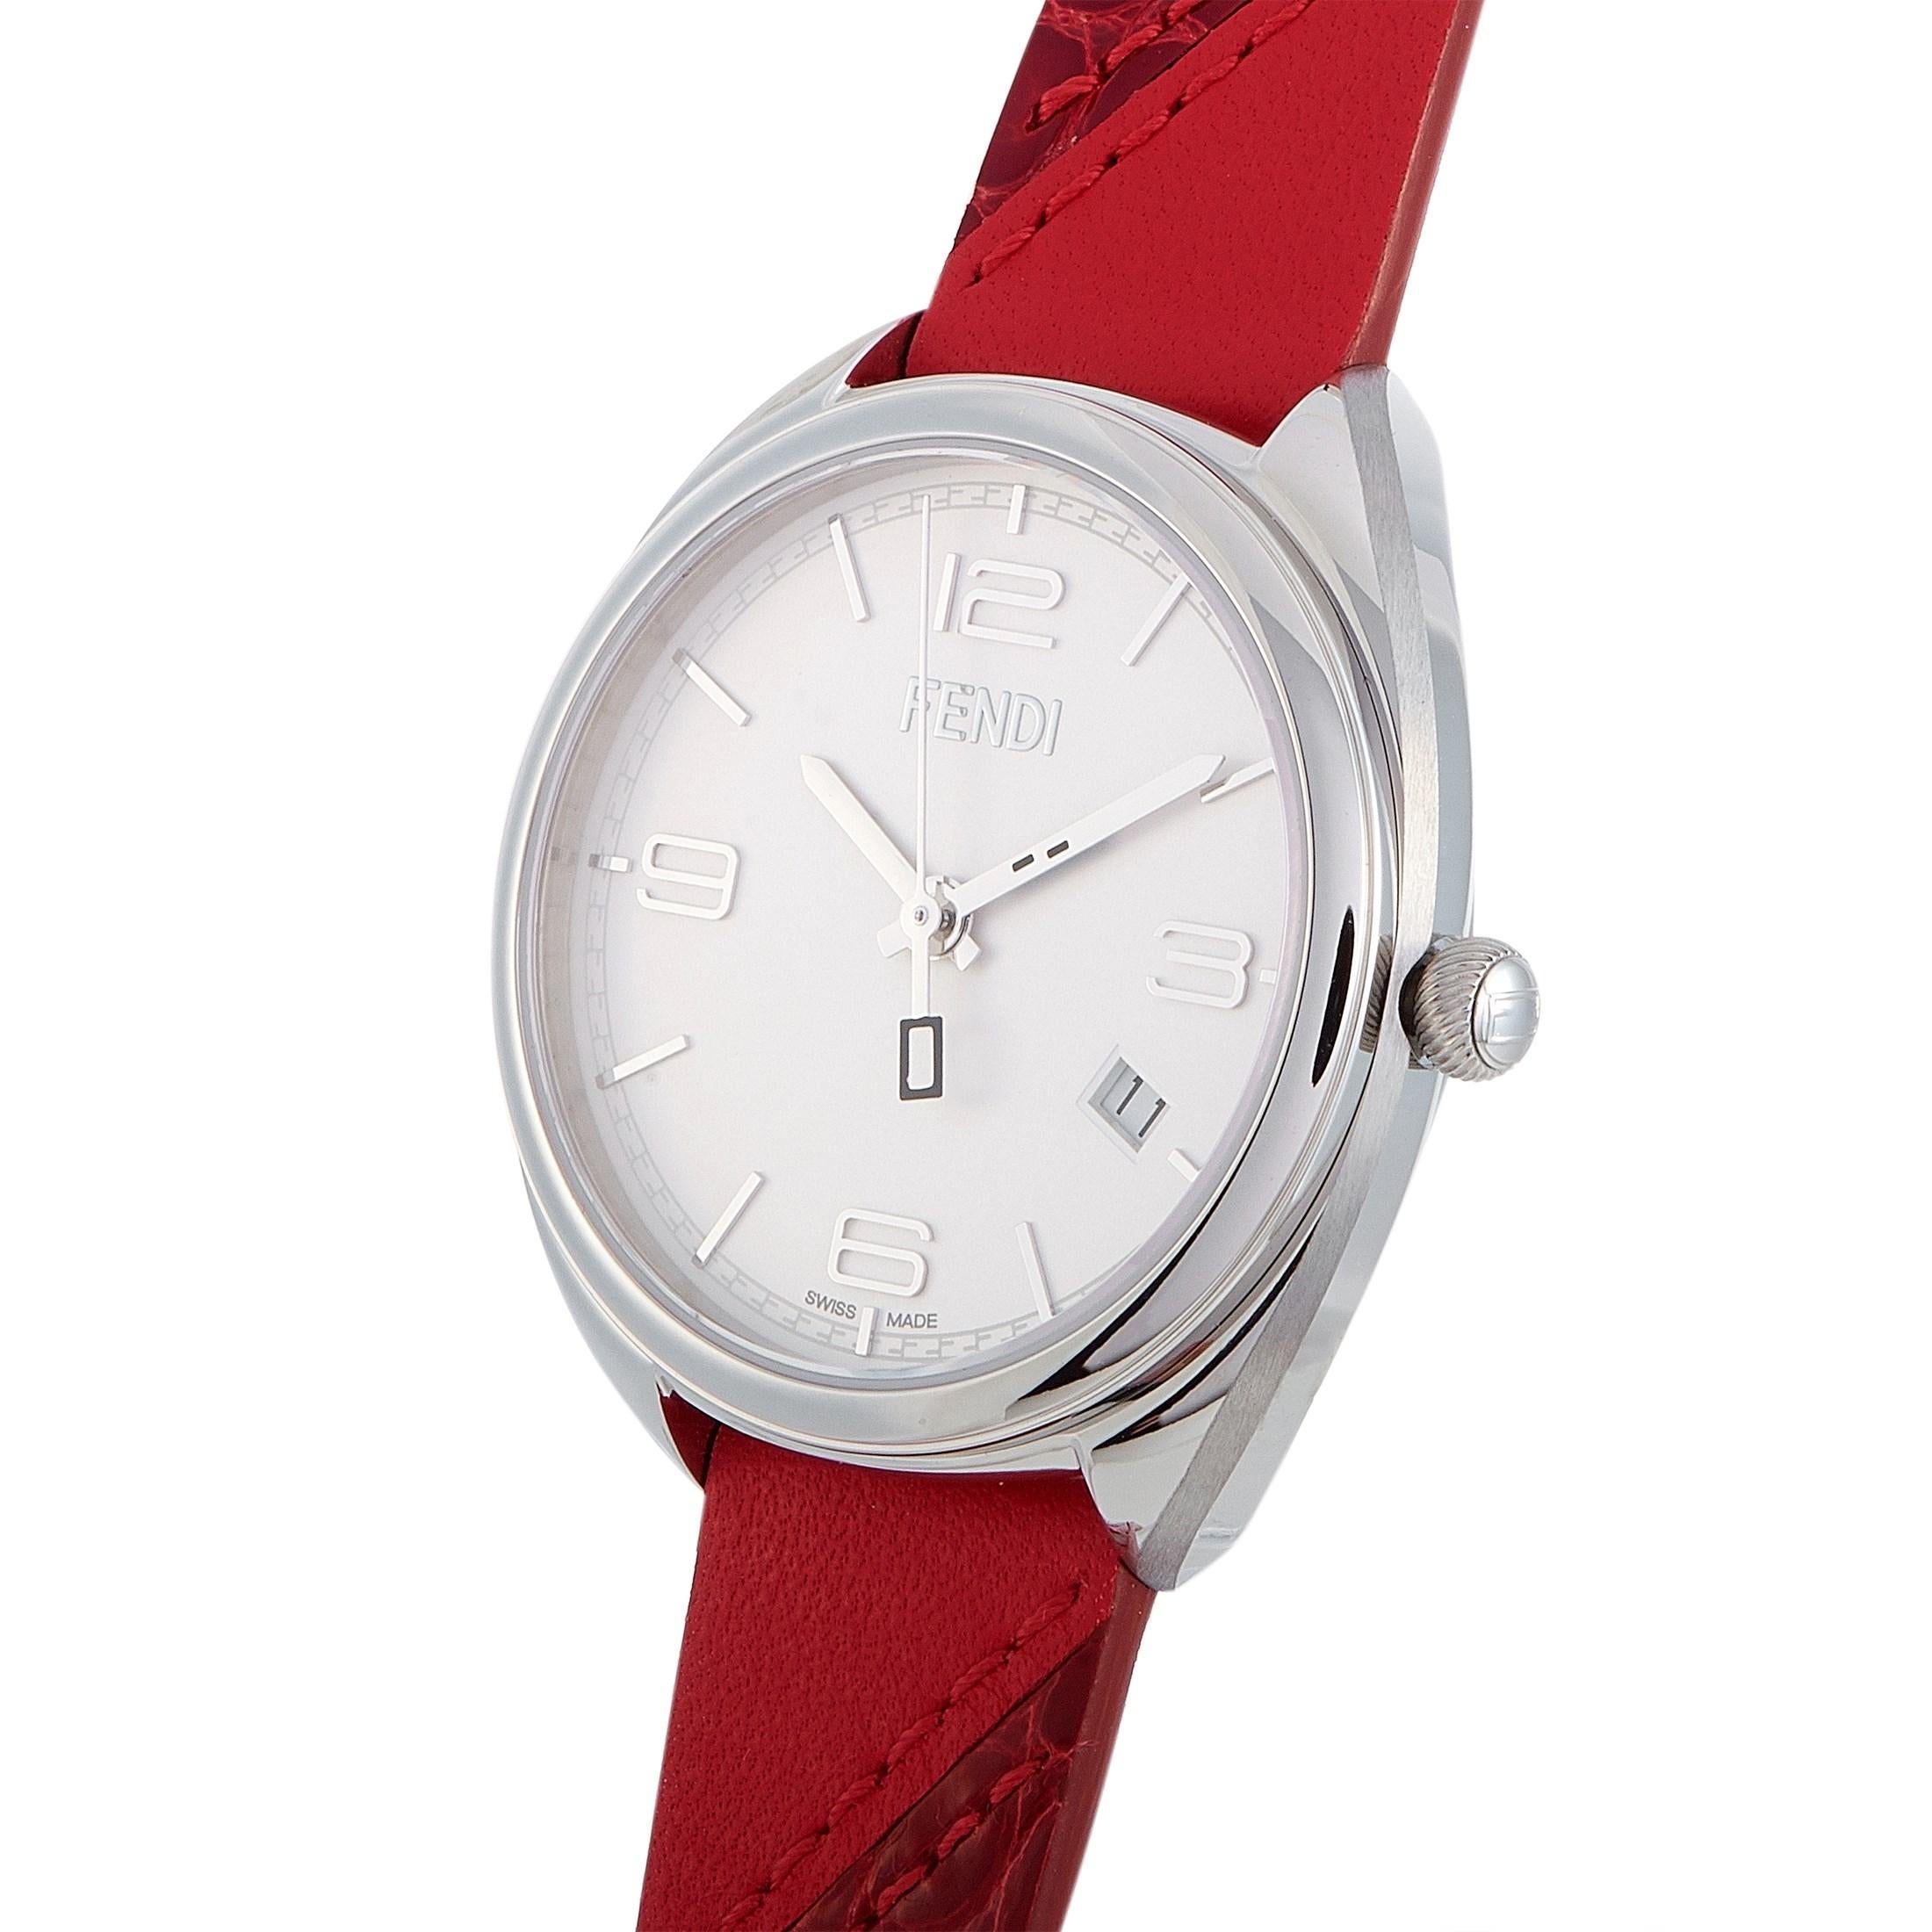 The Fendi Momento watch, reference number F210034073, boasts a 34 mm stainless steel case that is presented on a red leather strap, secured on the wrist with a tang buckle. This model is powered by a quartz movement and indicates hours, minutes,